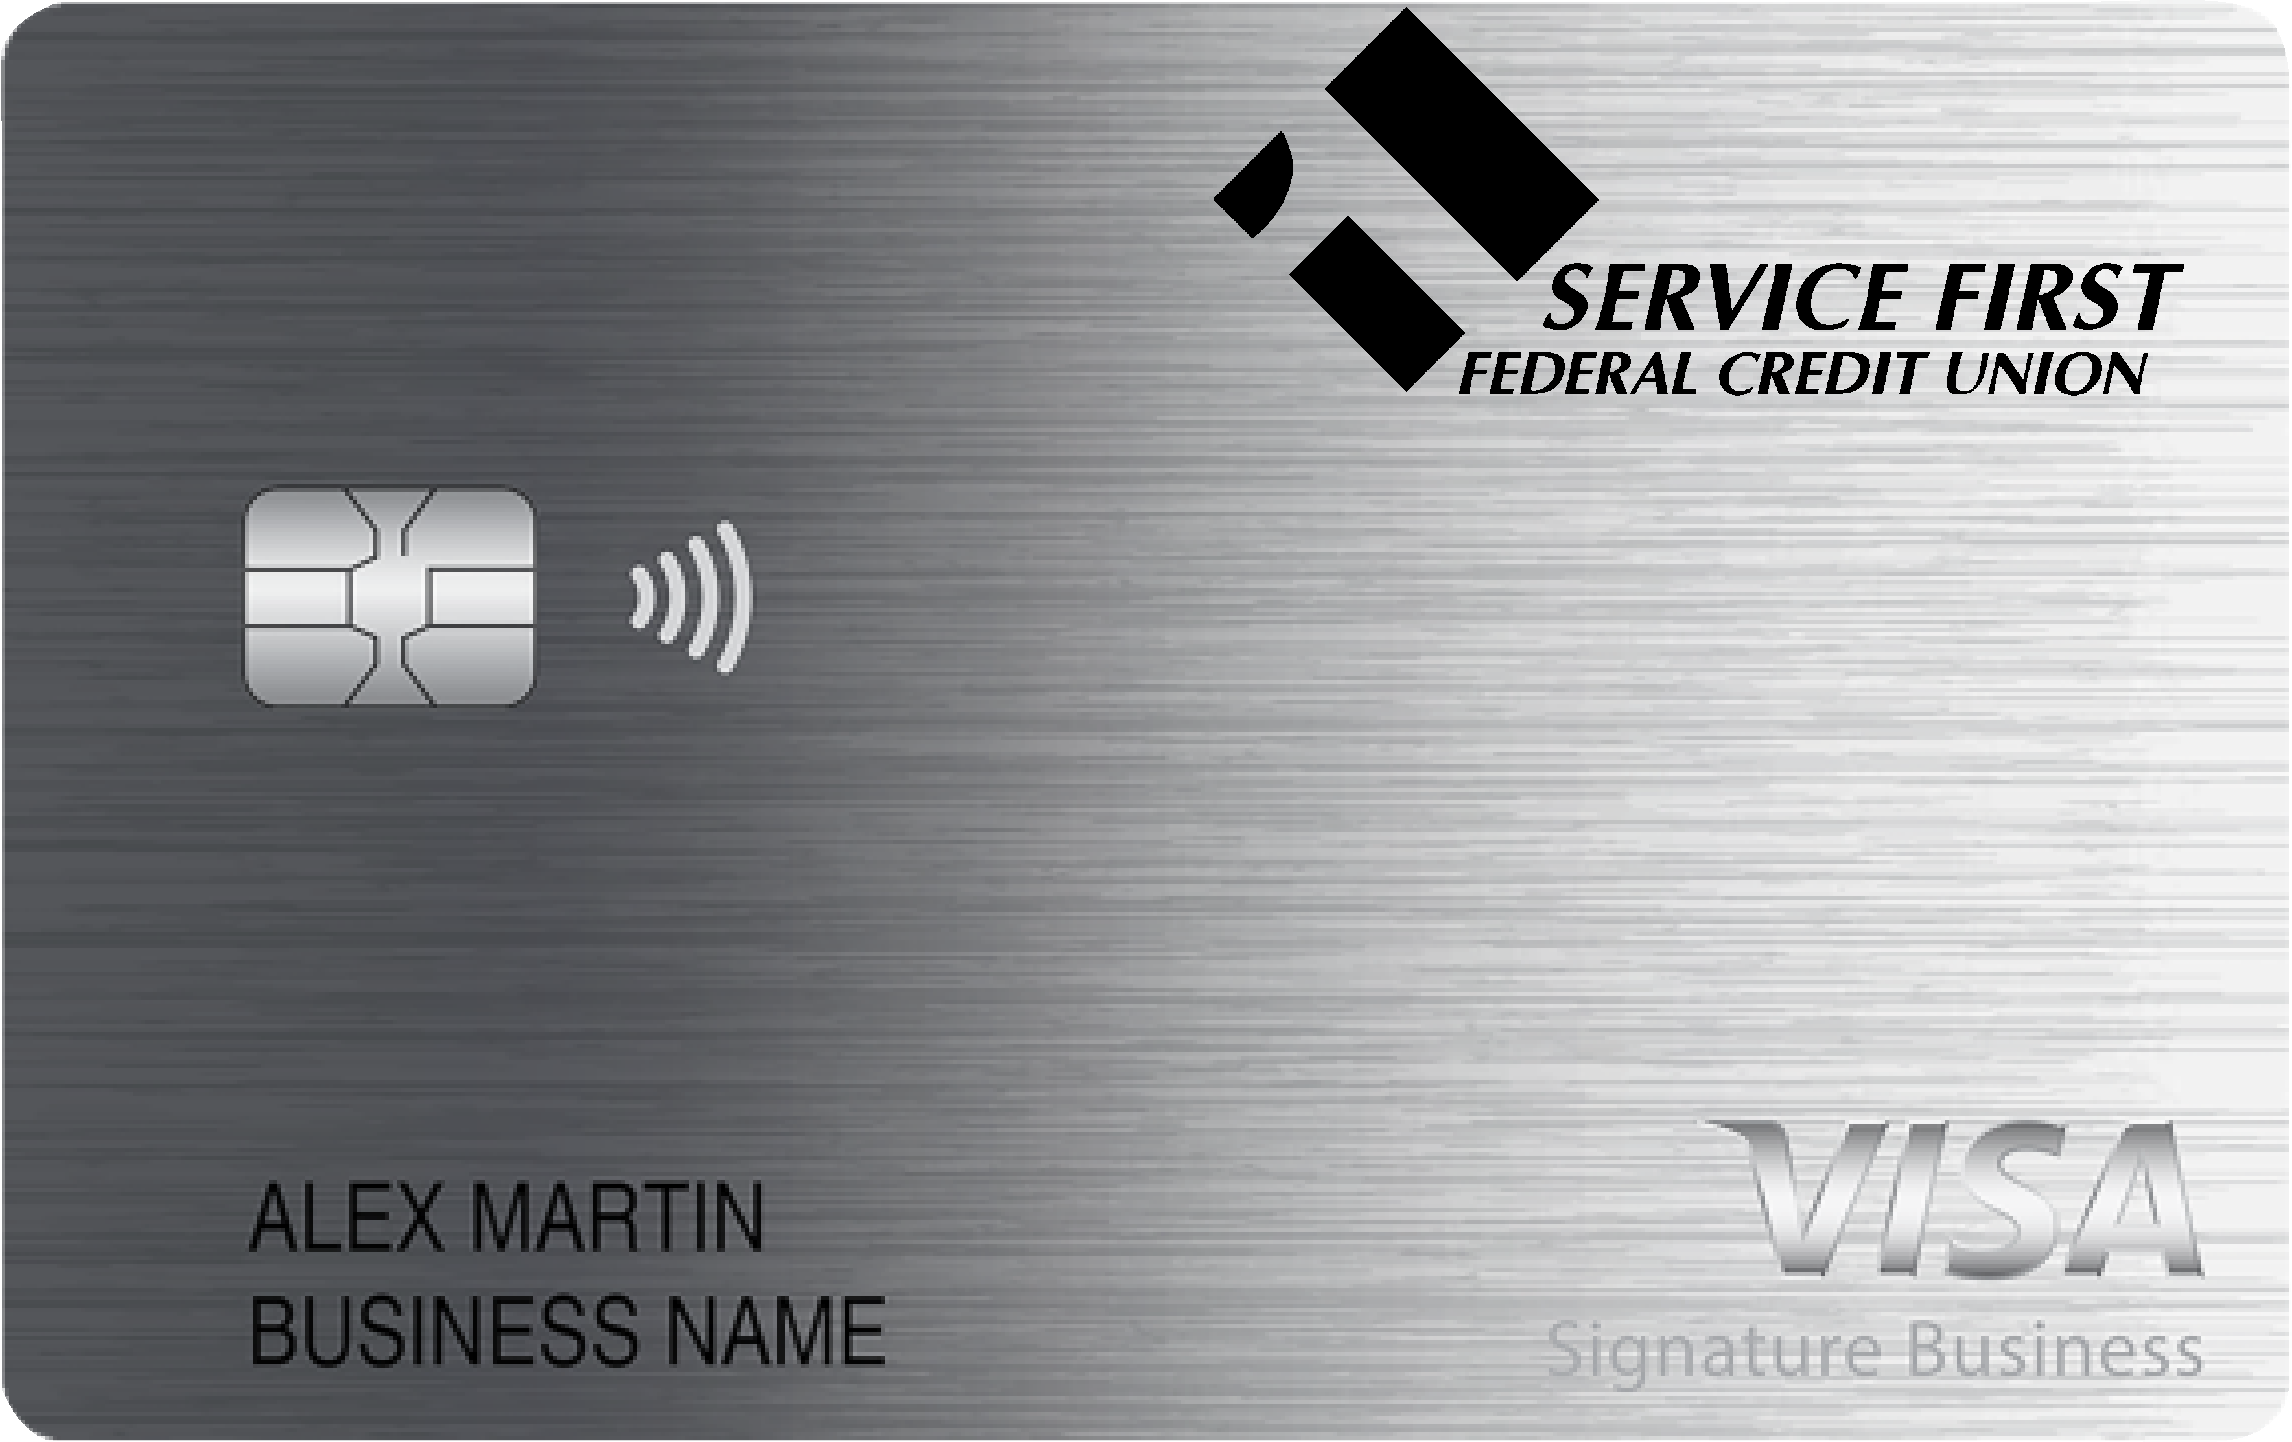 Service First Federal Credit Union Smart Business Rewards Card